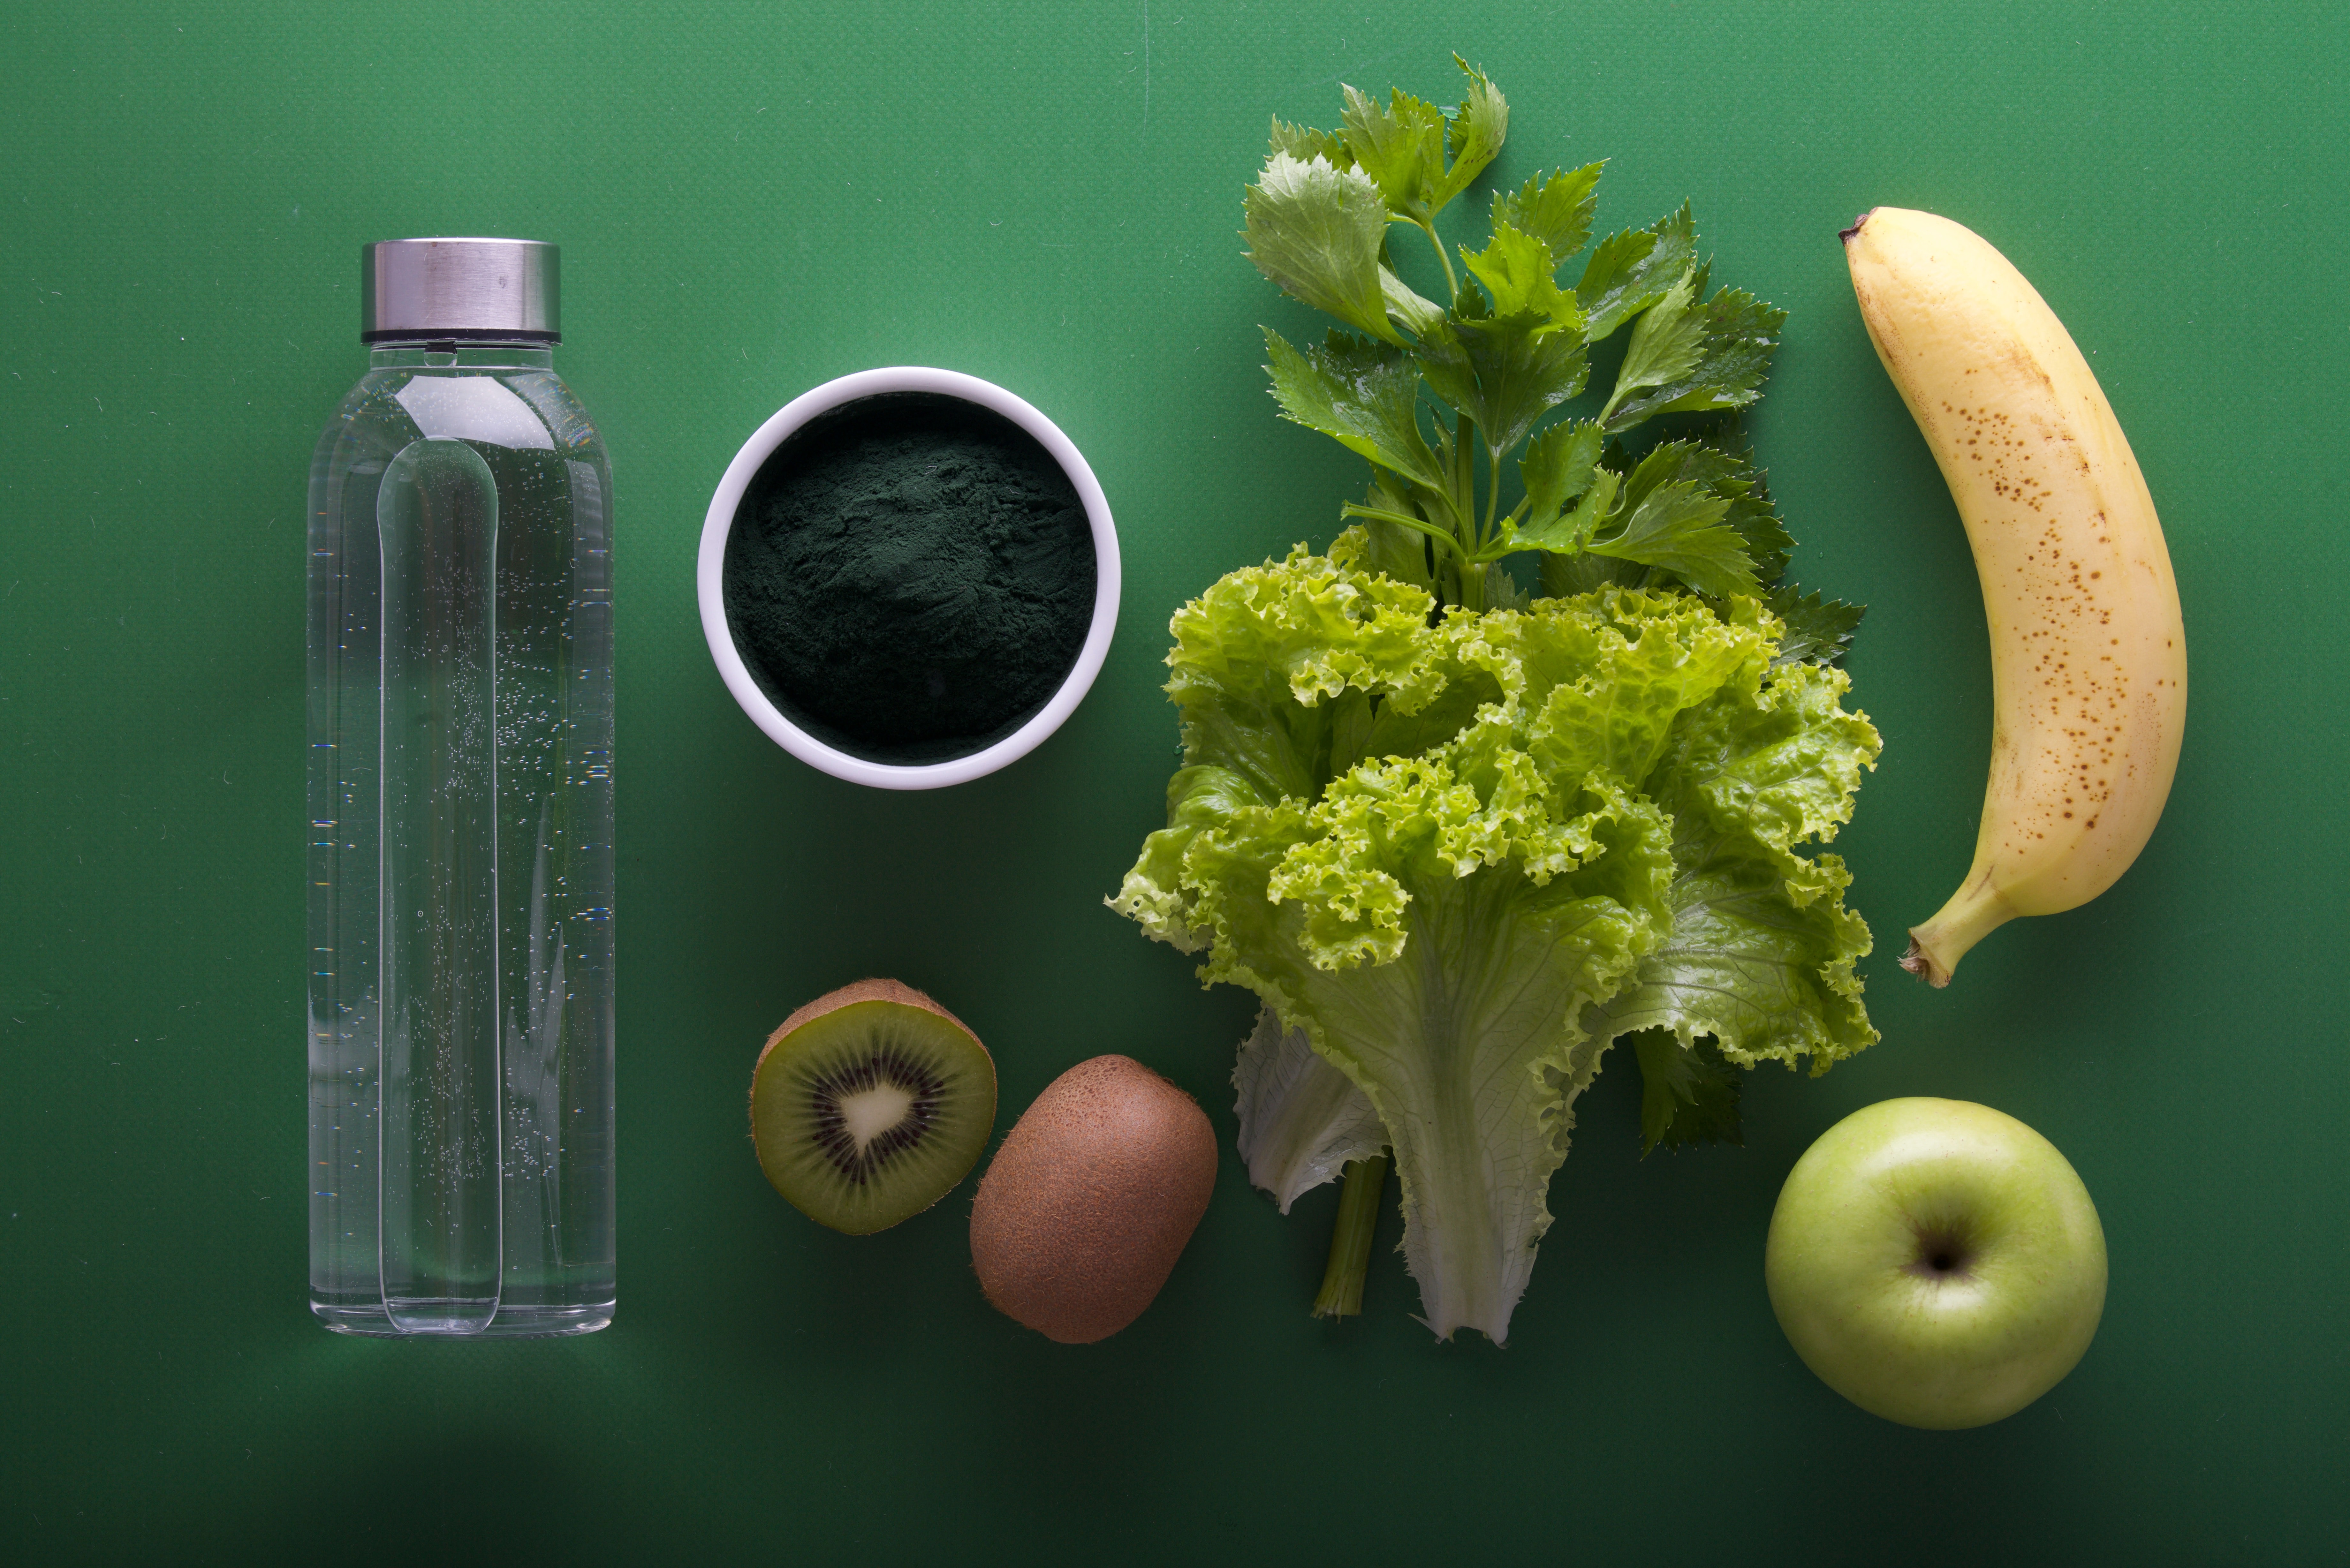 Bottle of water and miscellaneous fruits and greens